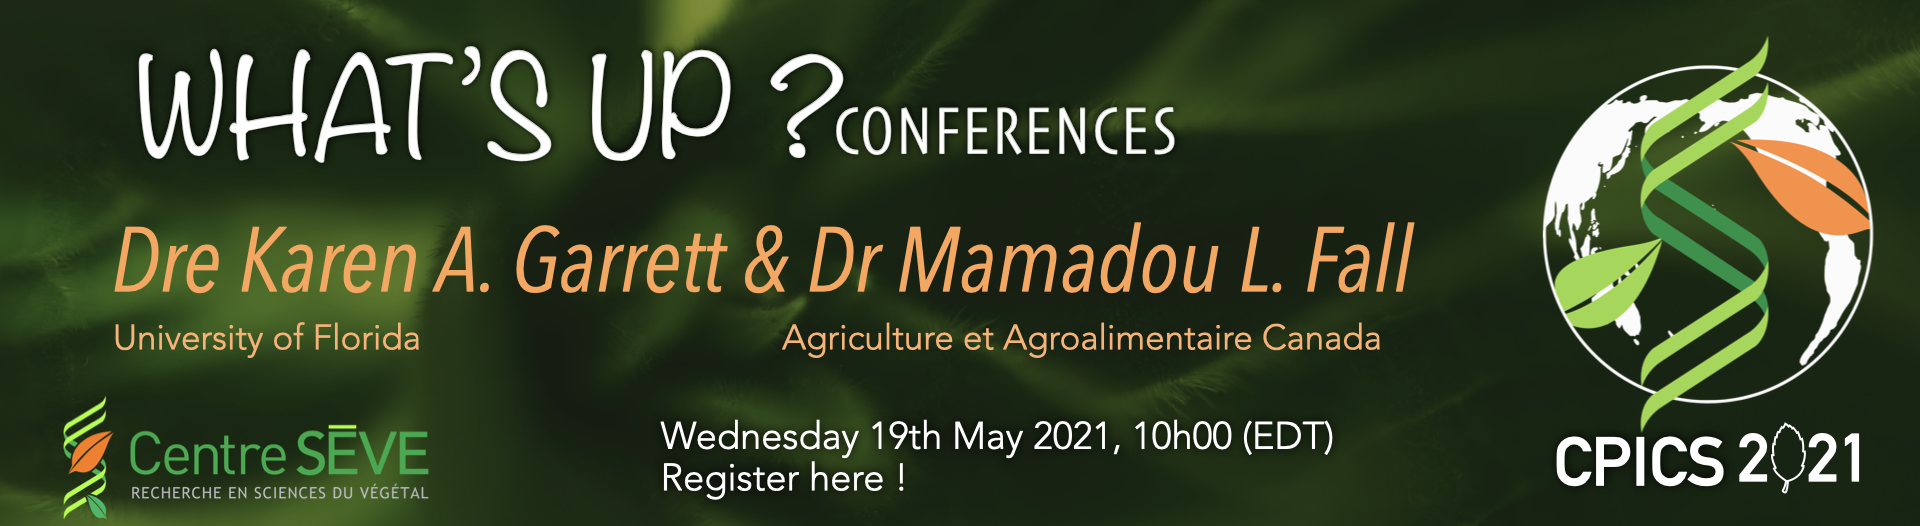 What's up conferences May 19<sup>th</sup> at 10h am with Dr. Karen Garrett from University of Florida and Dr. Mamadou Lamine Fall from Agriculture and Agri-Food Canada